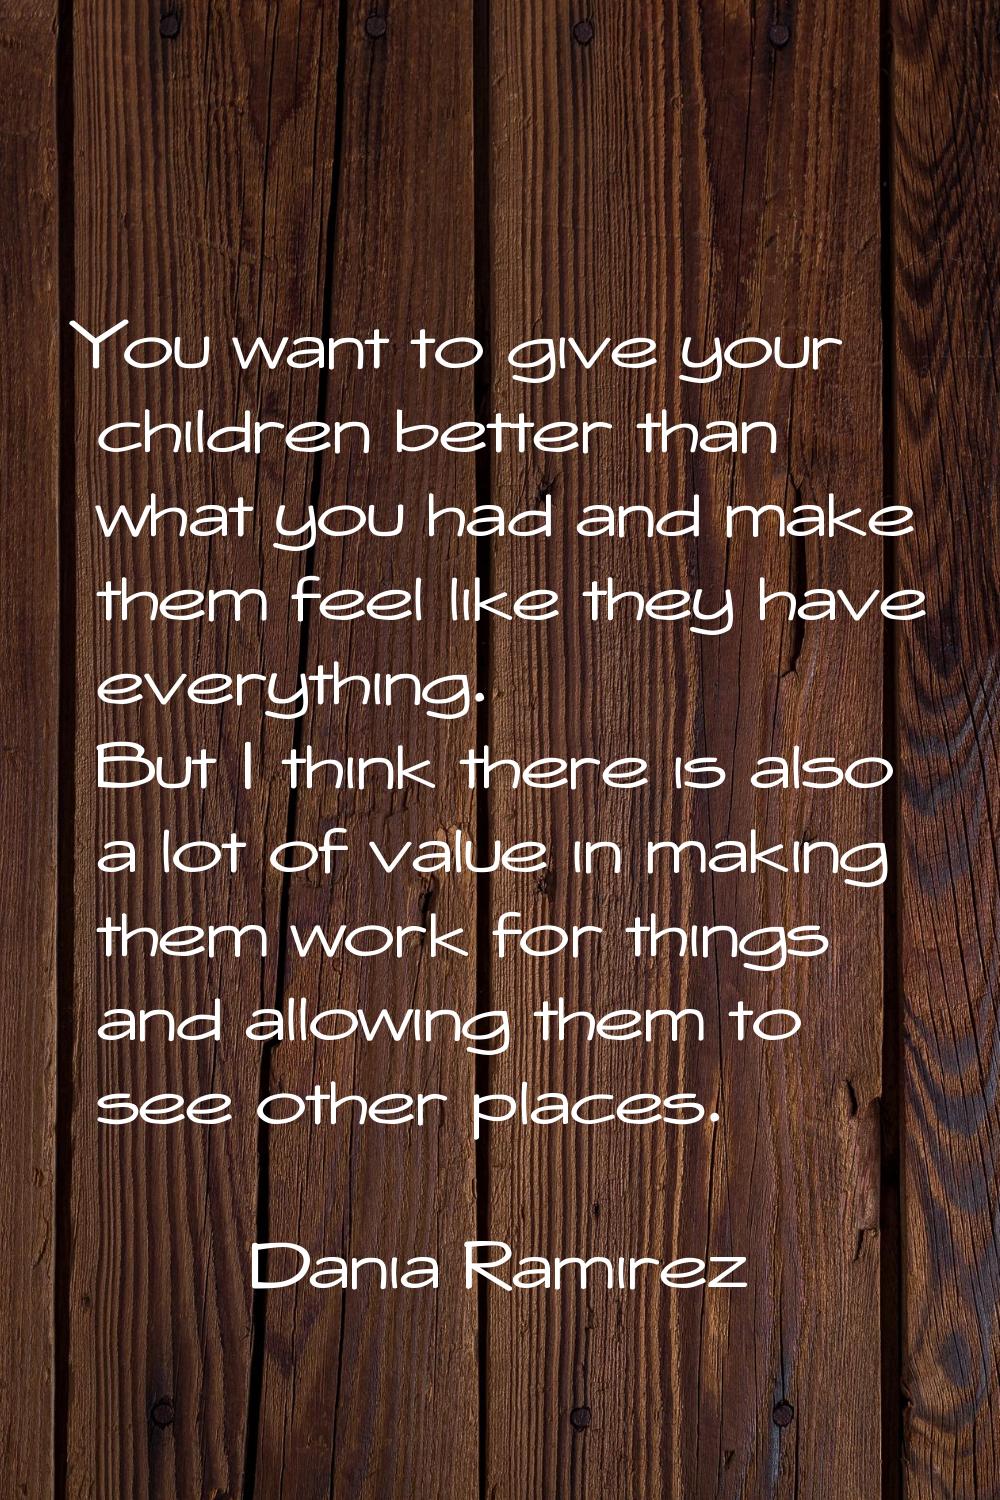 You want to give your children better than what you had and make them feel like they have everythin